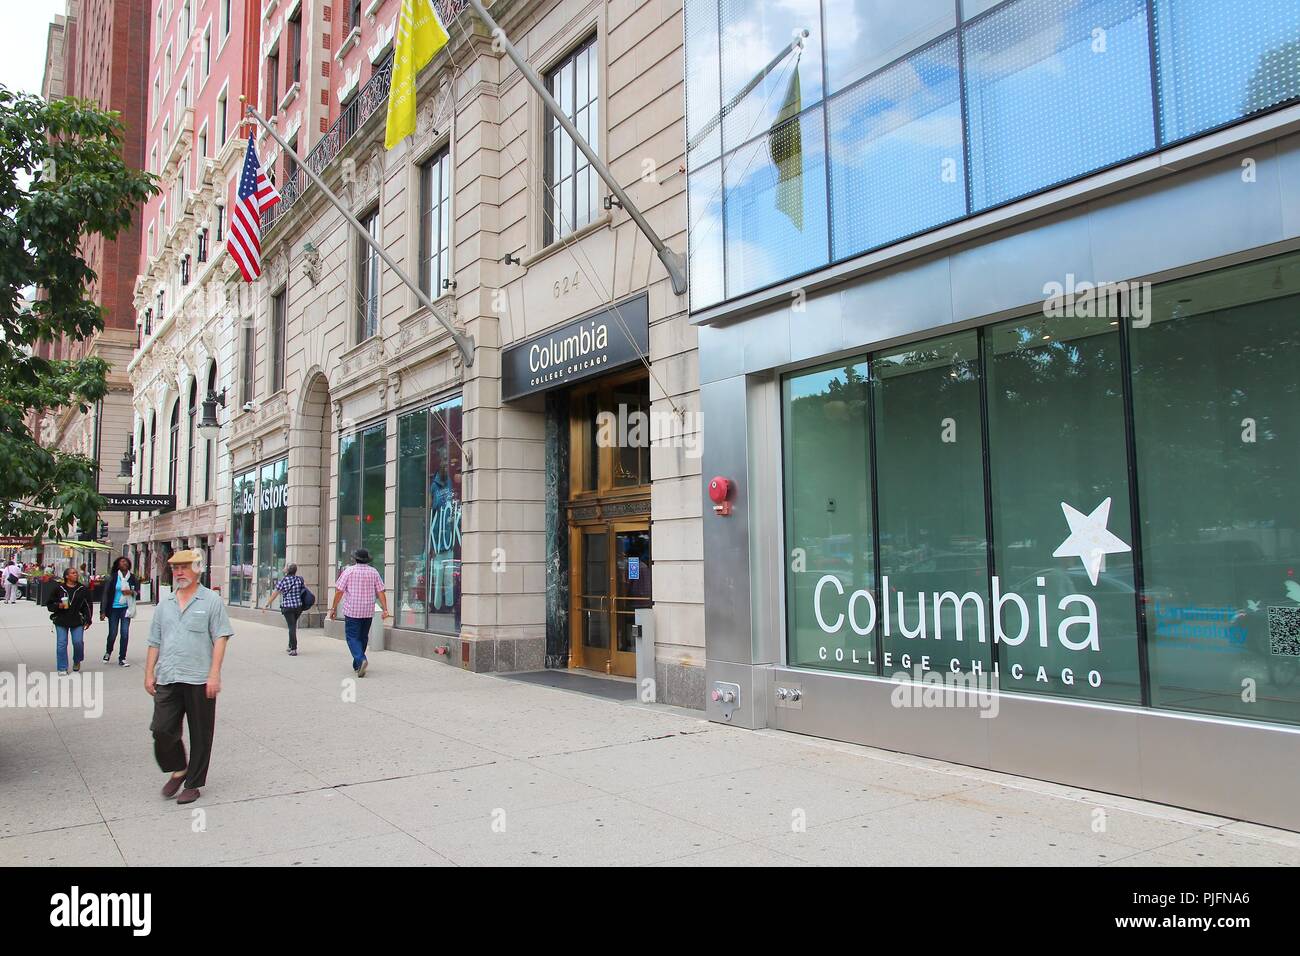 CHICAGO, USA - JUNE 27, 2013: People walk by Columbia College in Chicago. Columbia College was established in 1890 and has more than 10 thousand stude Stock Photo